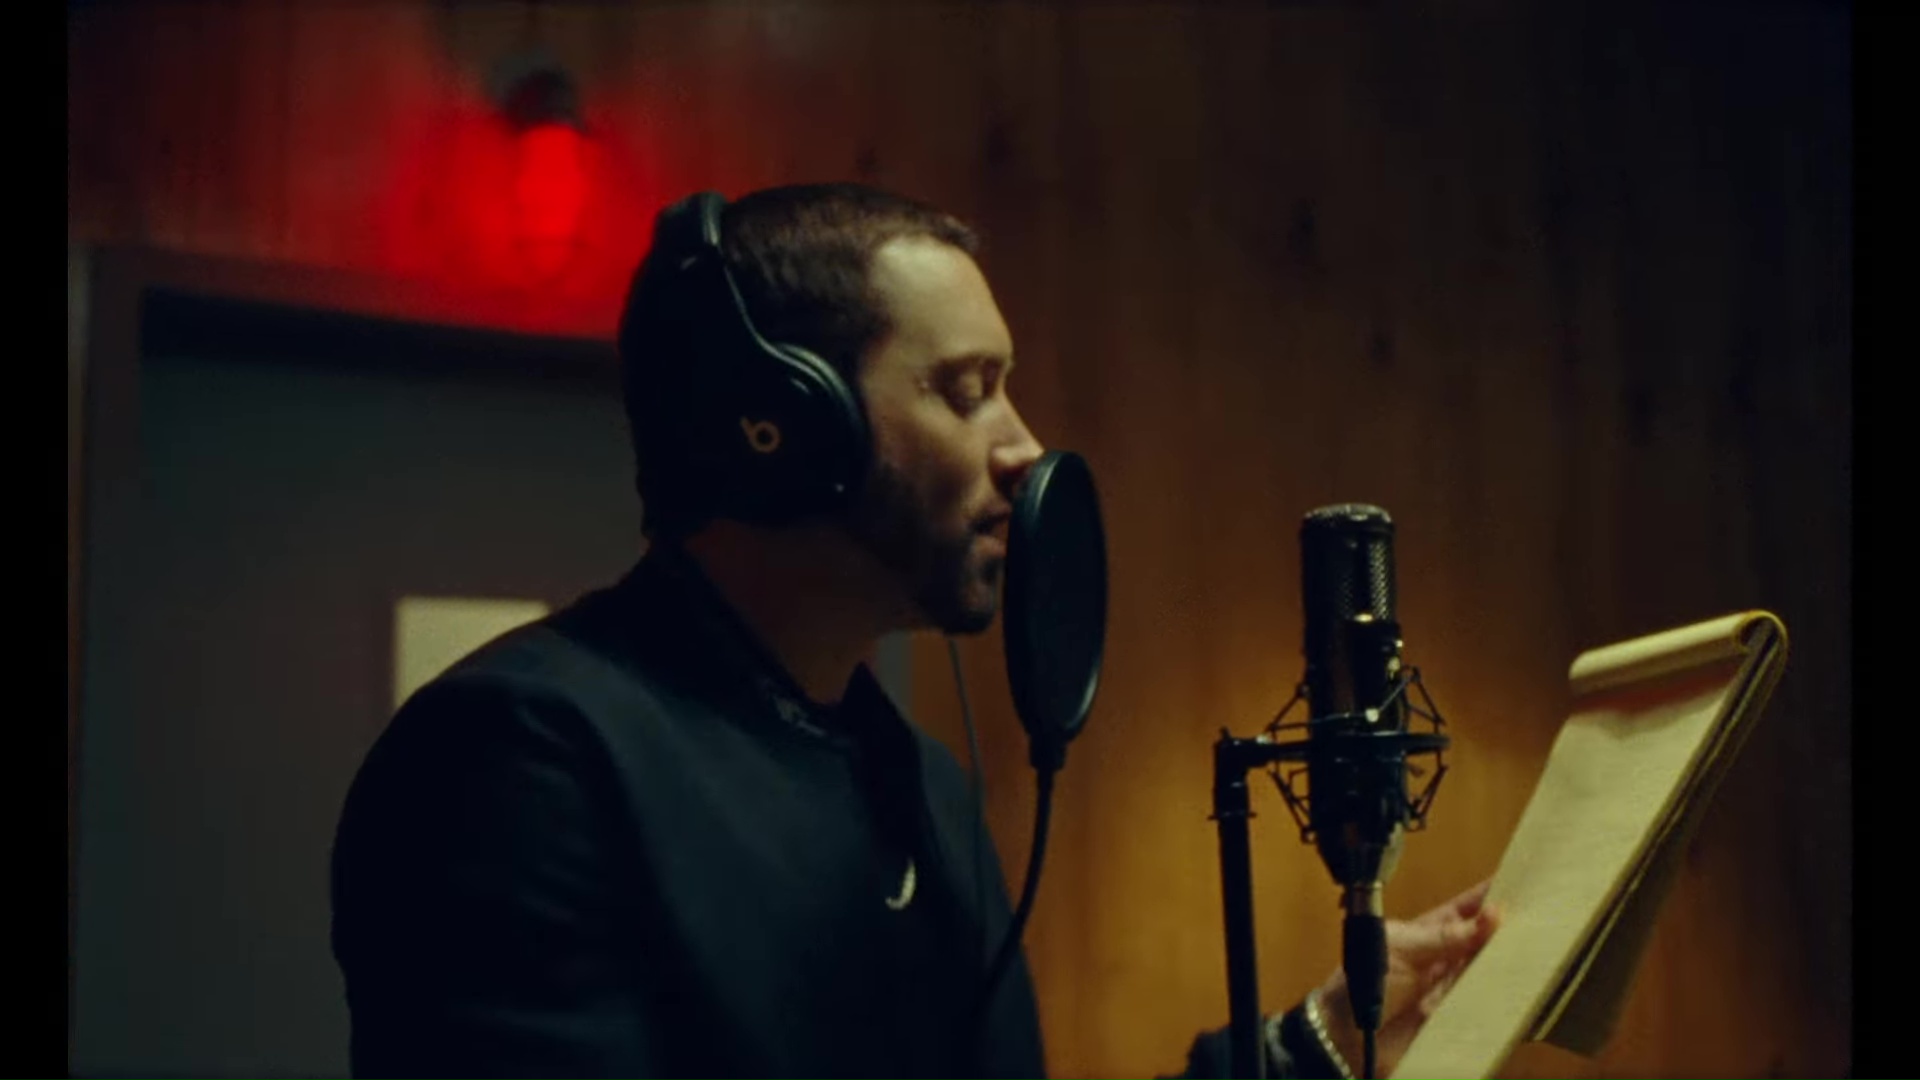 Beats Headphones in River by Eminem ft. Ed Sheeran (2018) Official Music Video1920 x 1080